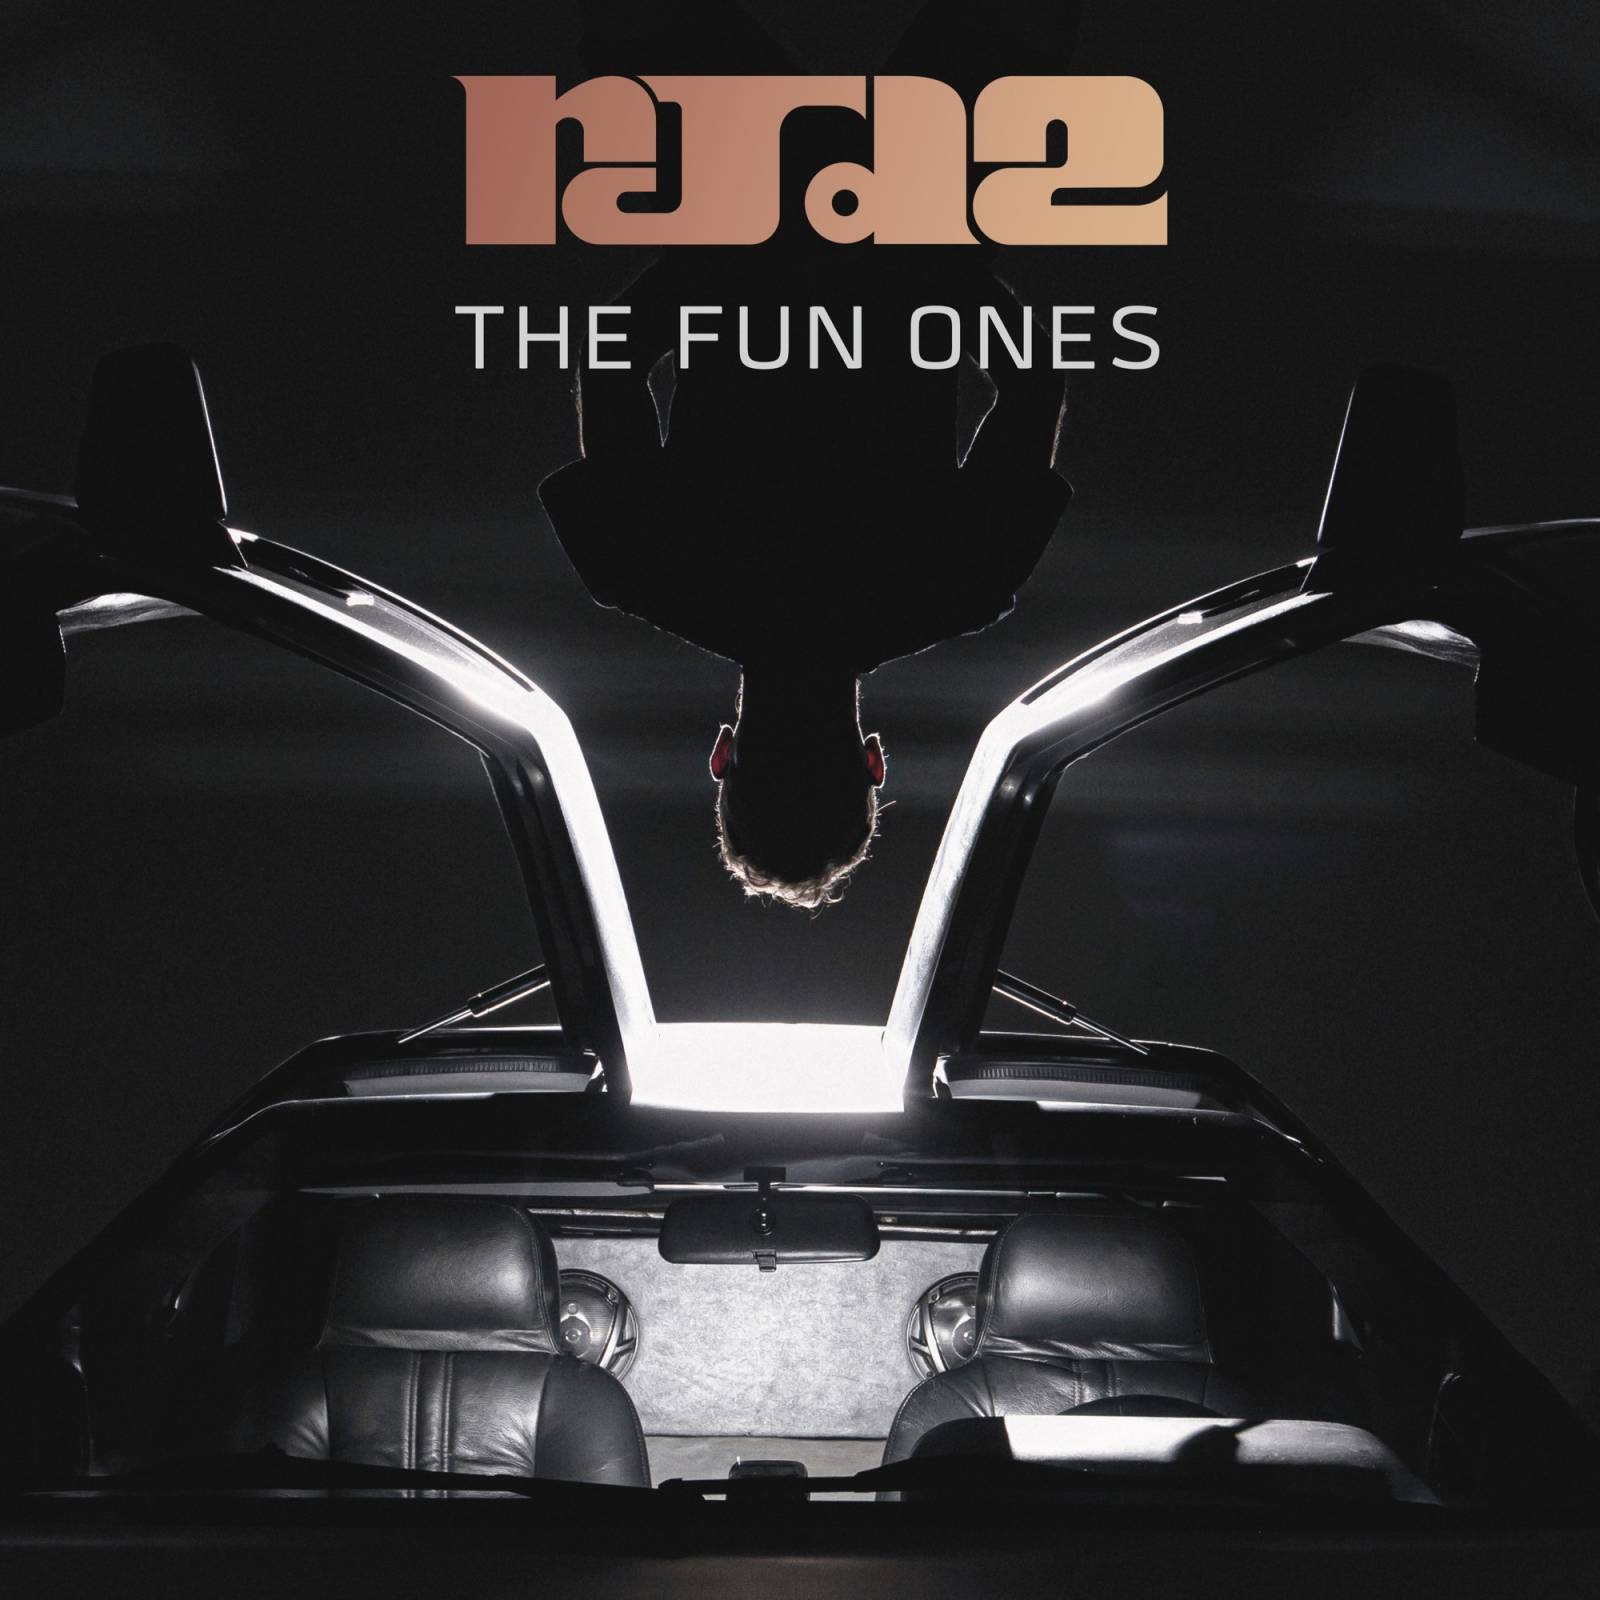 RJD2 Returns With 'The Fun Ones' LP